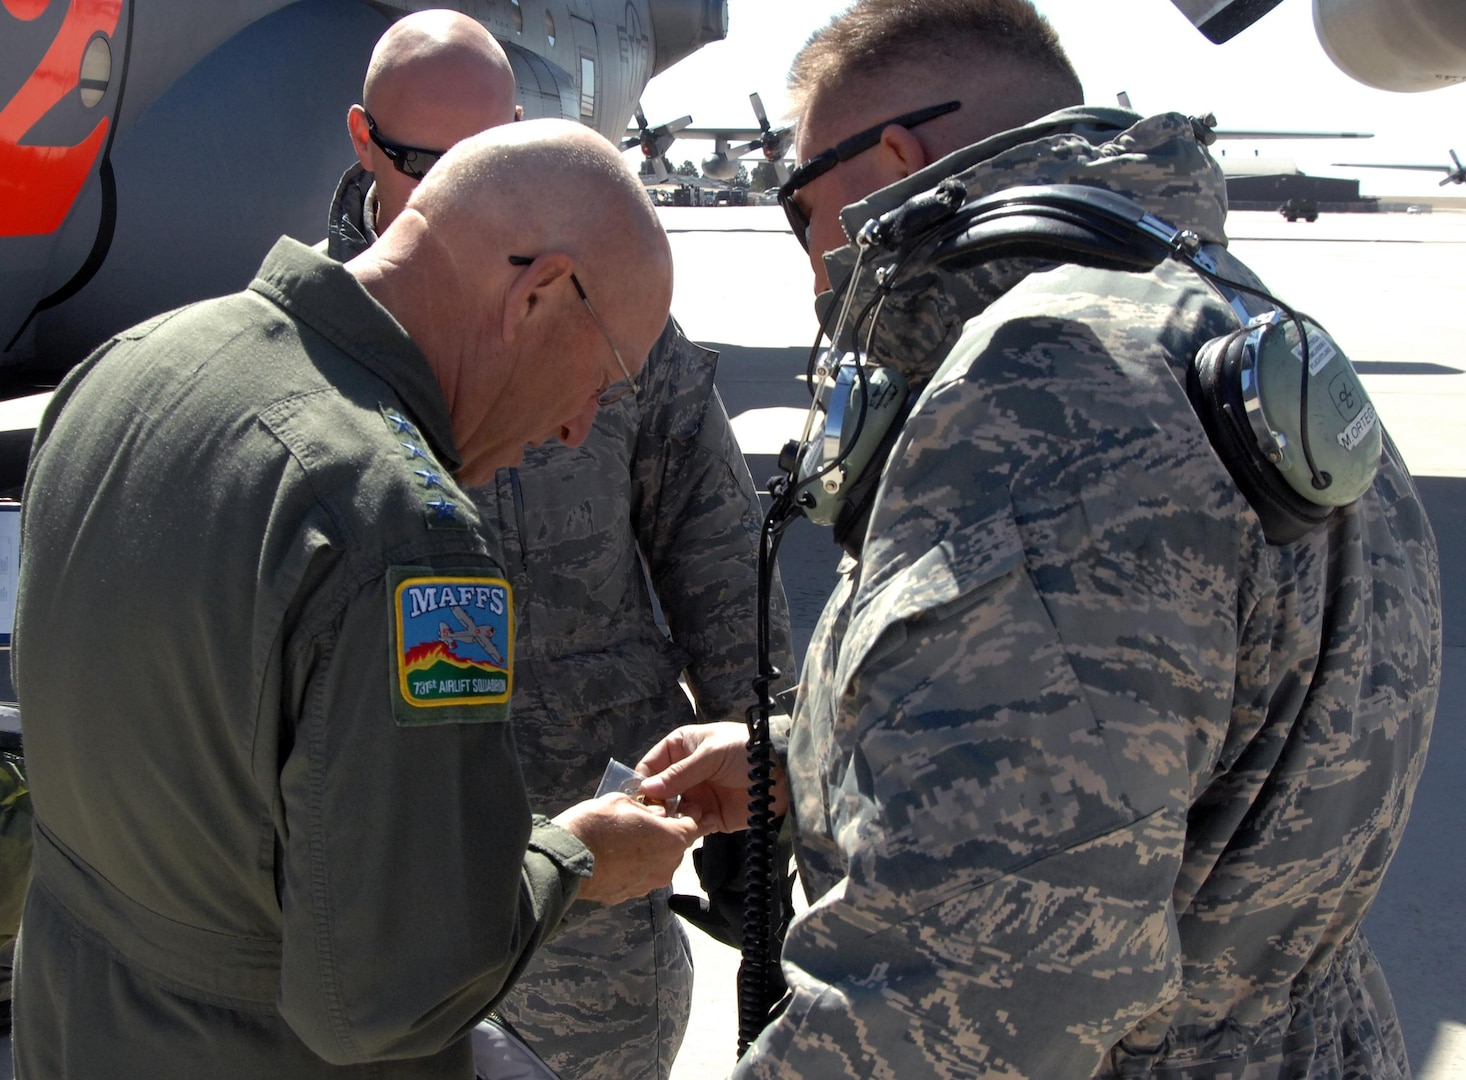 Air Force Gen. Gene Renuart, North American Aerospace Defense Command and U.S. Northern Command commander, accepts a challenge coin from Tech. Sgt. Manuel Ortega, 302nd Aircraft Maintenance Squadron, before his final flight at Peterson Air Force Base May 5. (U.S. Air Force photo by Staff Sgt. Thomas J. Doscher)